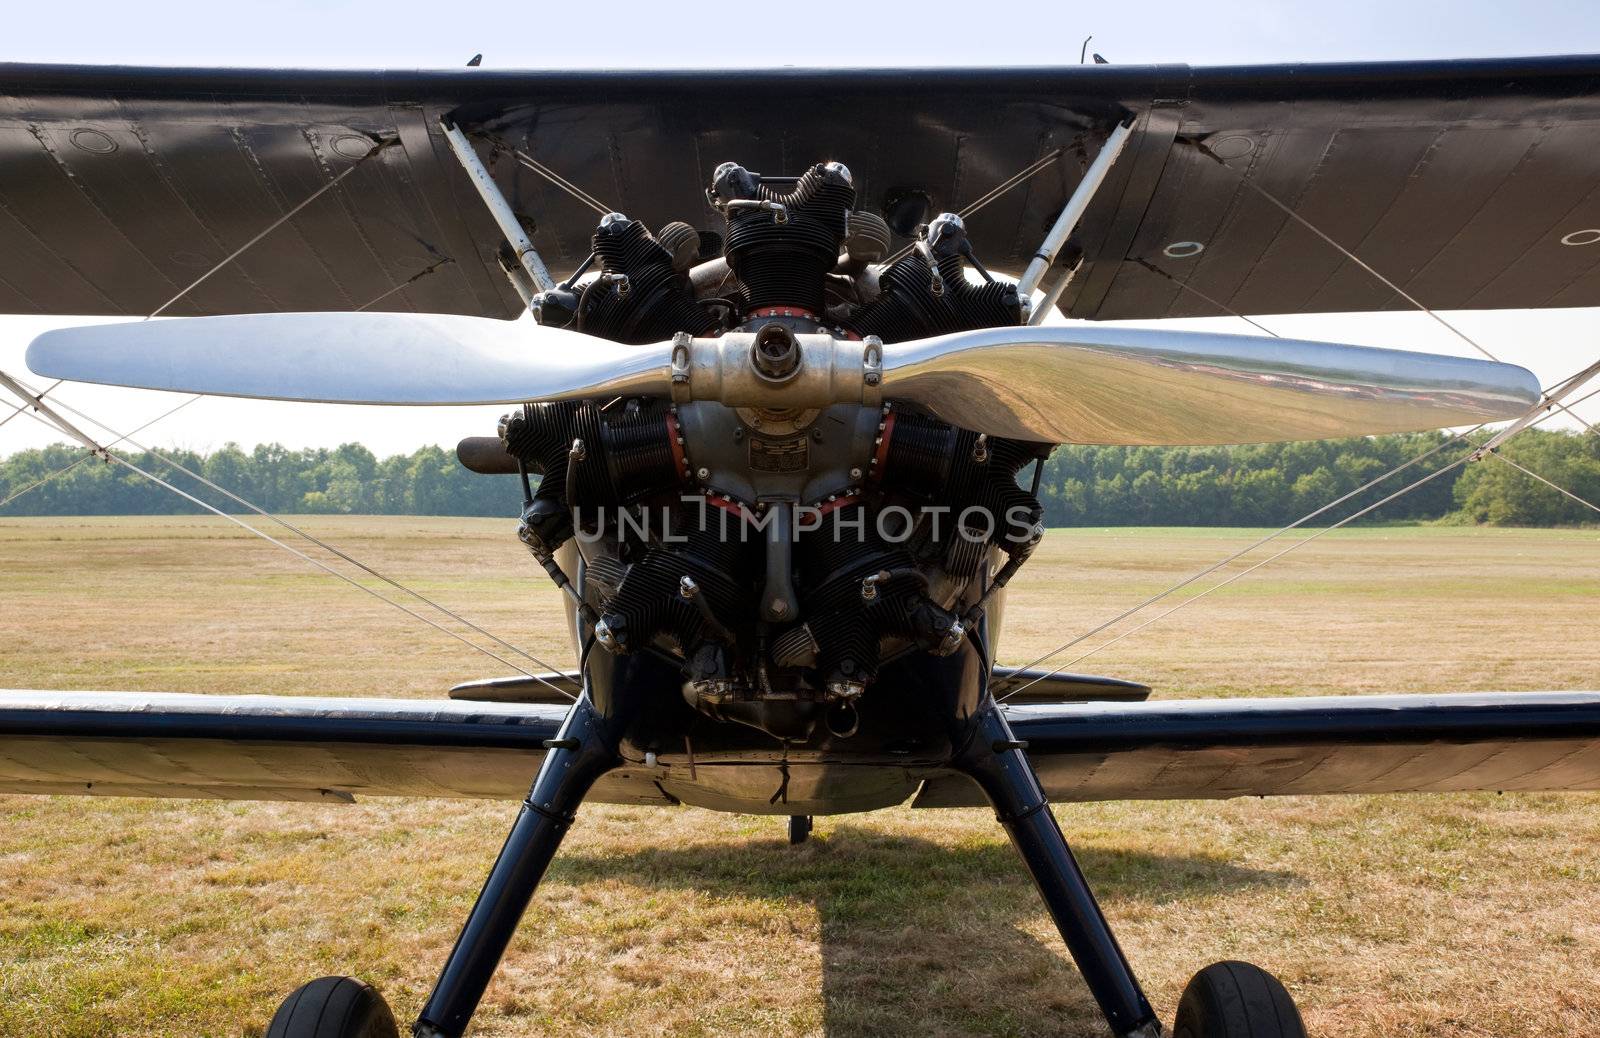 Close up of the engine and propellor of antique biplane